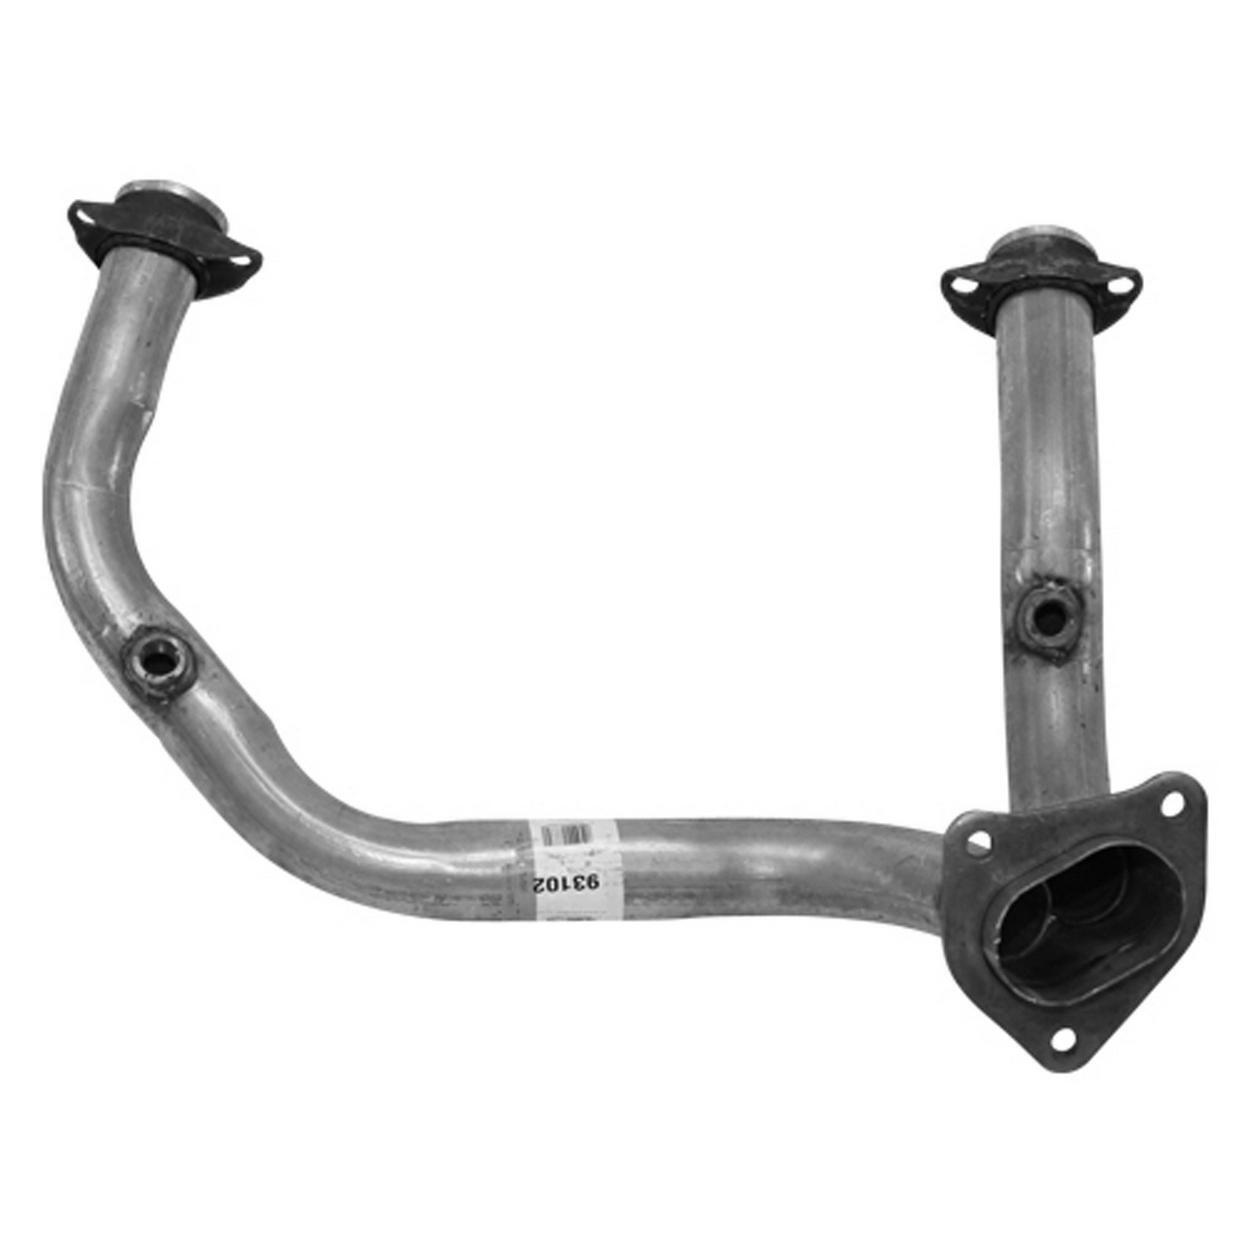 93102-AX Exhaust Pipe Fits 1993-1994 Ford Ranger 4.0L V6 GAS OHV